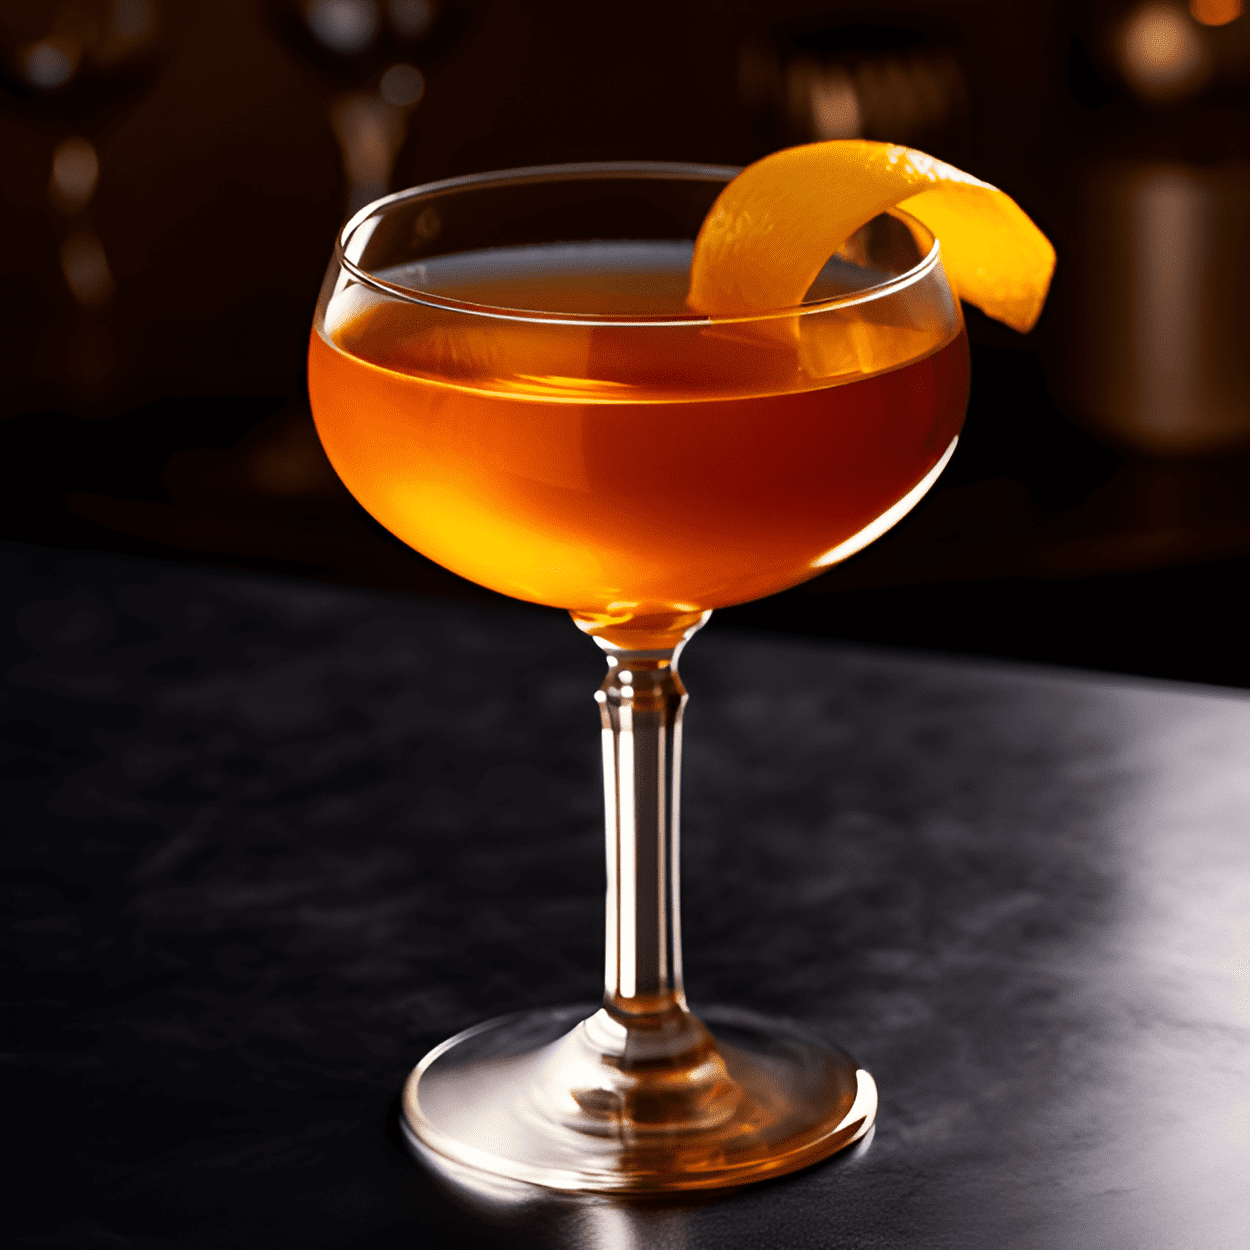 Body Heat Cocktail Recipe - The Body Heat cocktail is a unique blend of sweet, sour, and spicy. The sweetness of the honey is balanced by the tartness of the lemon, while the chili pepper adds a surprising kick. The bourbon gives it a robust and warm flavor, making it a truly invigorating drink.